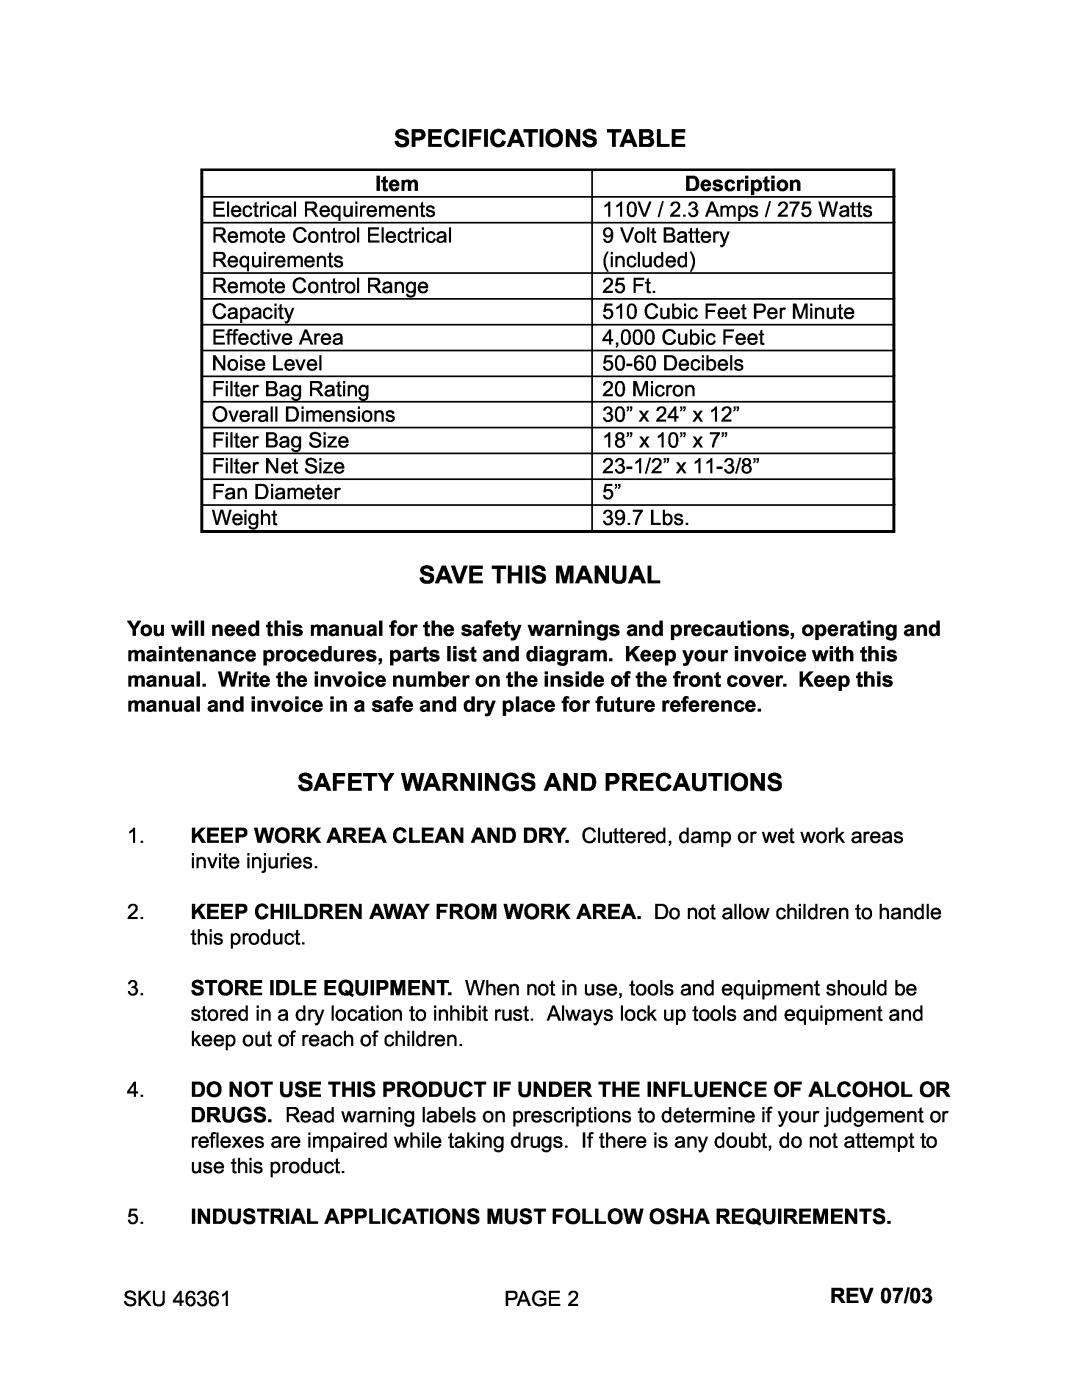 Harbor Freight Tools 46361 manual Specifications Table Save This Manual, Safety Warnings And Precautions 